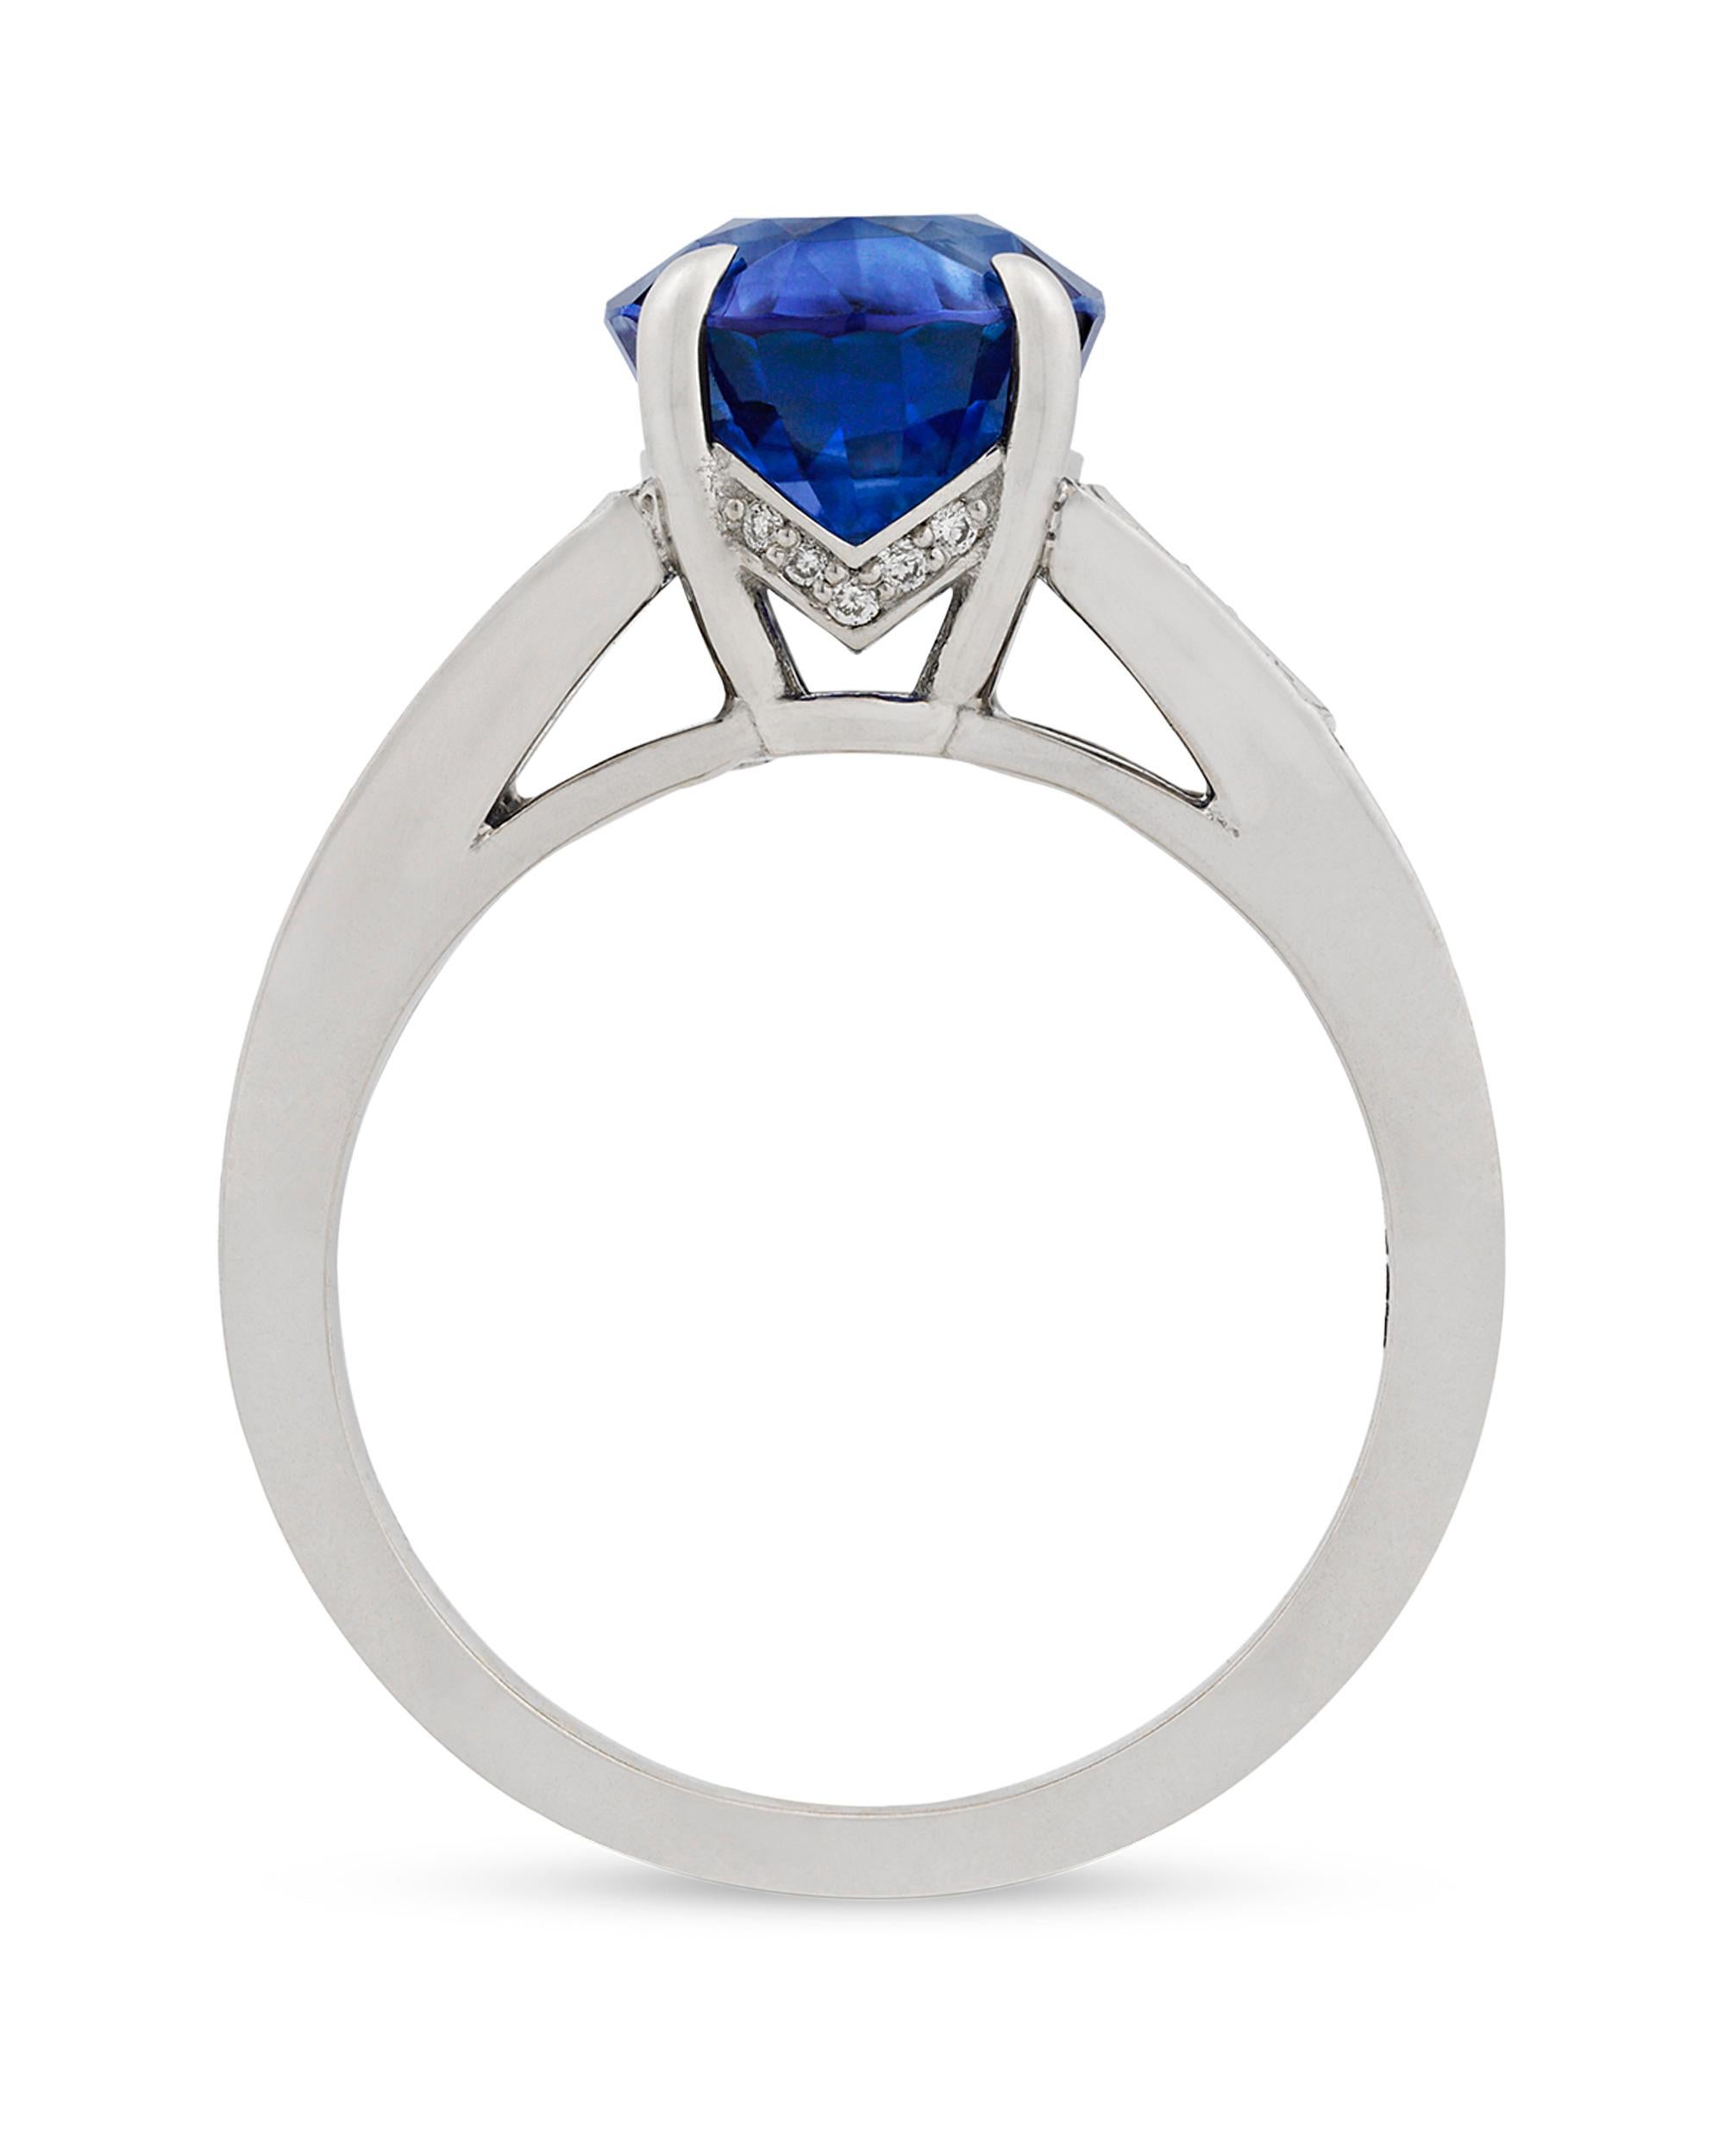 This brilliant 4.15-carat oval-shaped blue Ceylon sapphire is enhanced by two shield-cut white diamonds totaling 0.28 carat. The richly colored stone is showcased in a classic 18K white gold setting encrusted with 58 round diamonds totaling 0.18